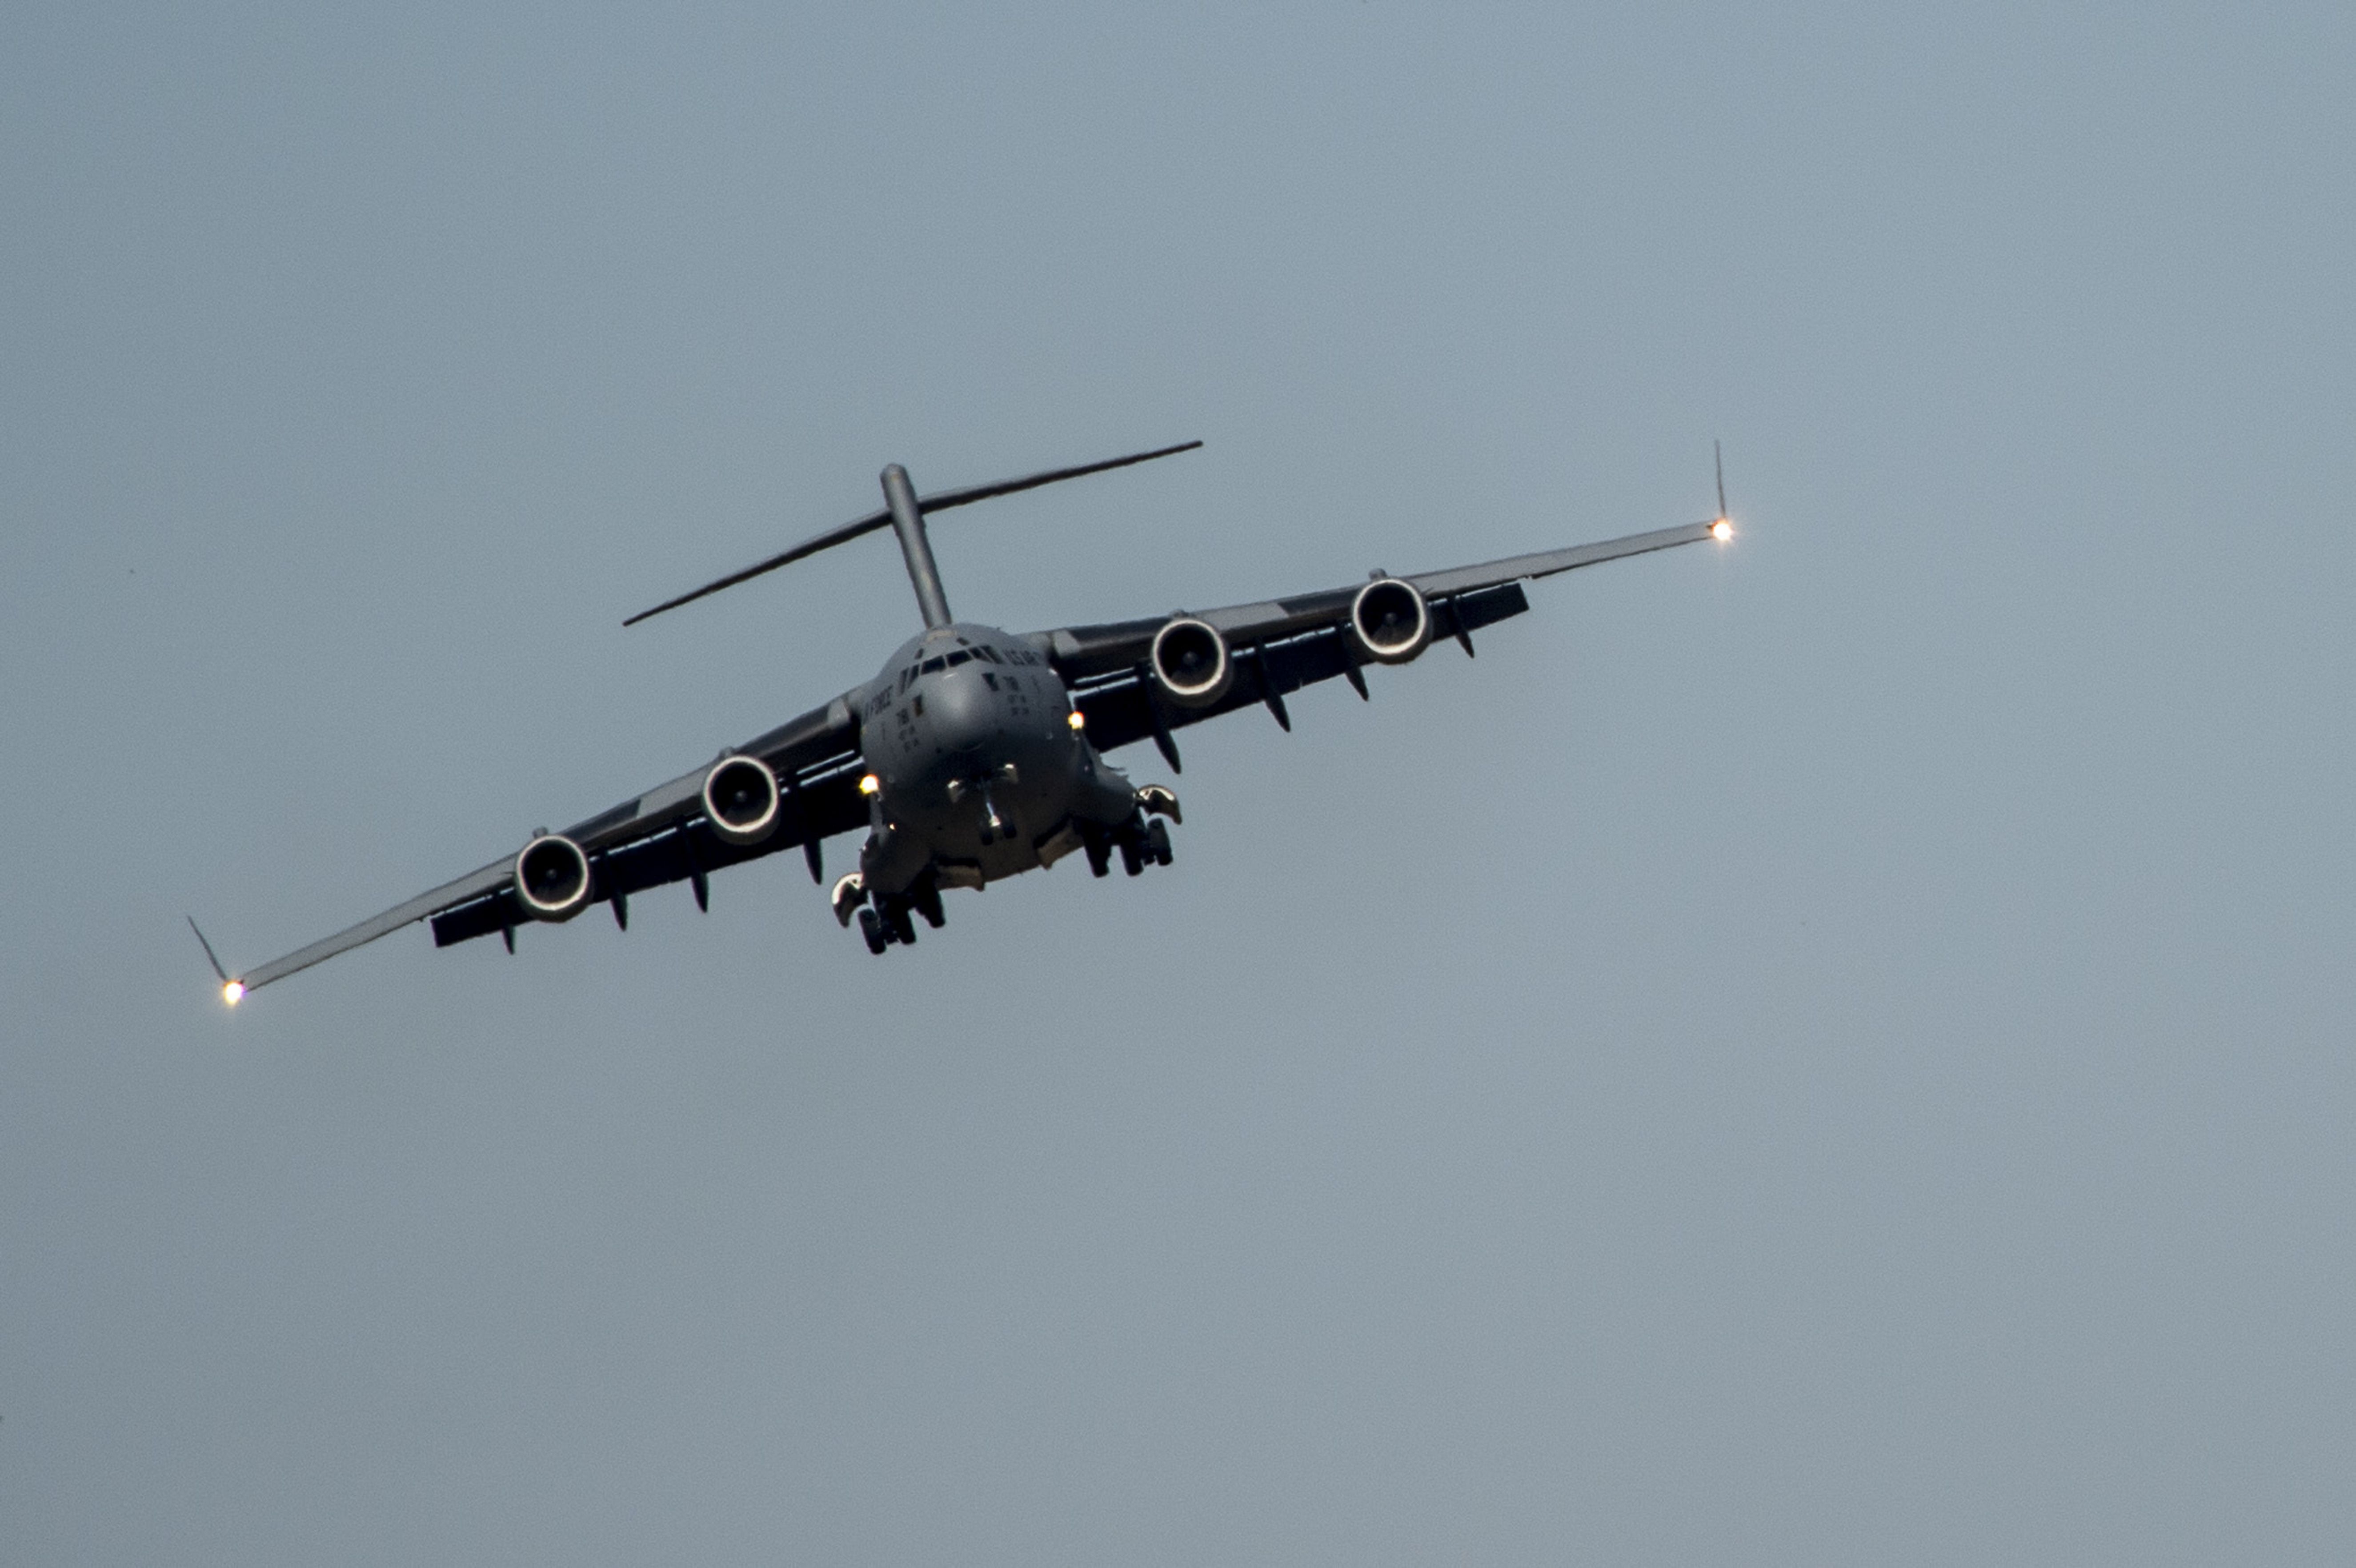 C-17 Globemaster: What Makes This Transport Such a Badass Plane